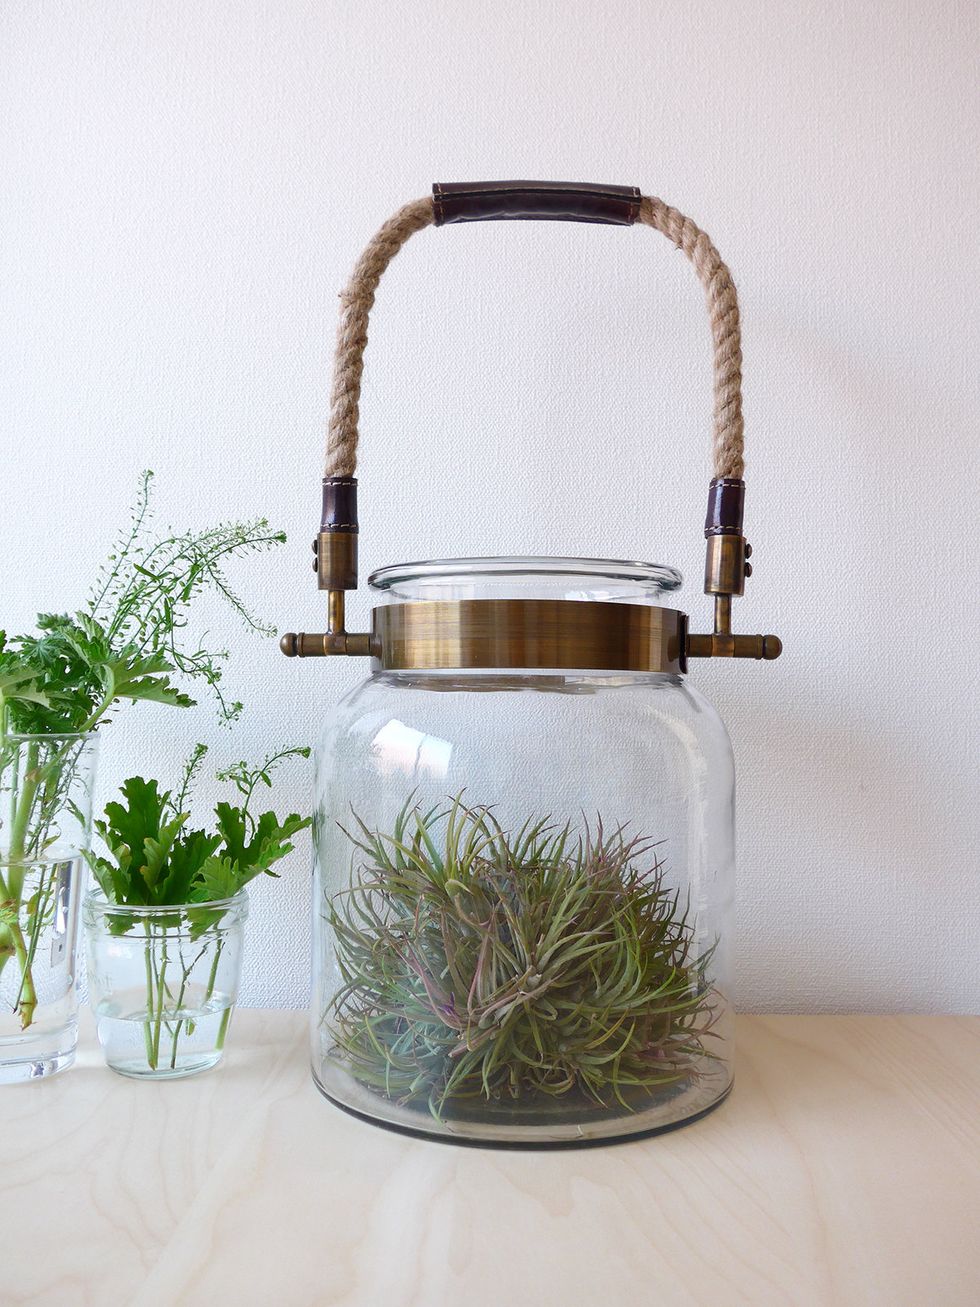 Interior design, Lavender, Herb, Silver, Lid, Houseplant, Fines herbes, Annual plant, Food storage containers, Plant stem, 